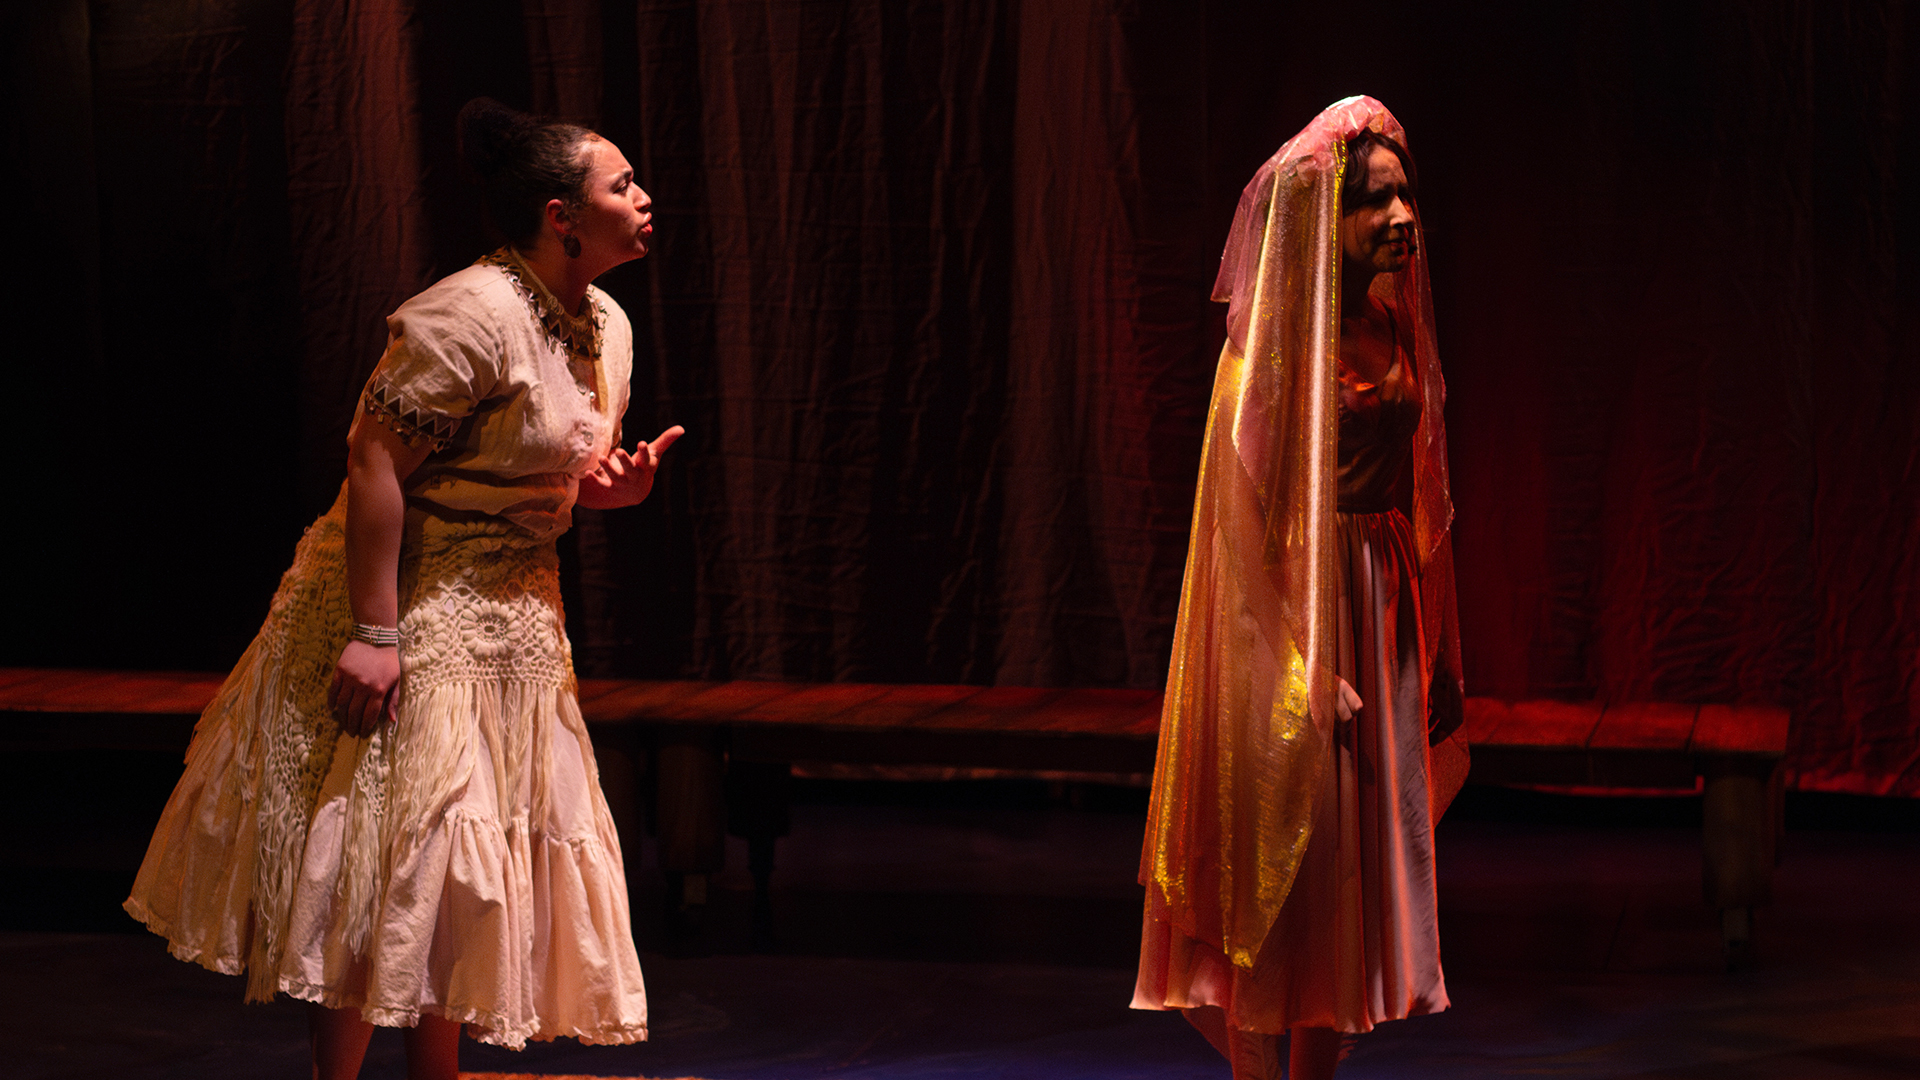 Two actors interact on stage, bathed in a reddish orange light. One actor, wearing a wedding dress and a veil, turns away from the other actor, who is facing her back and appears to be pleading with her.